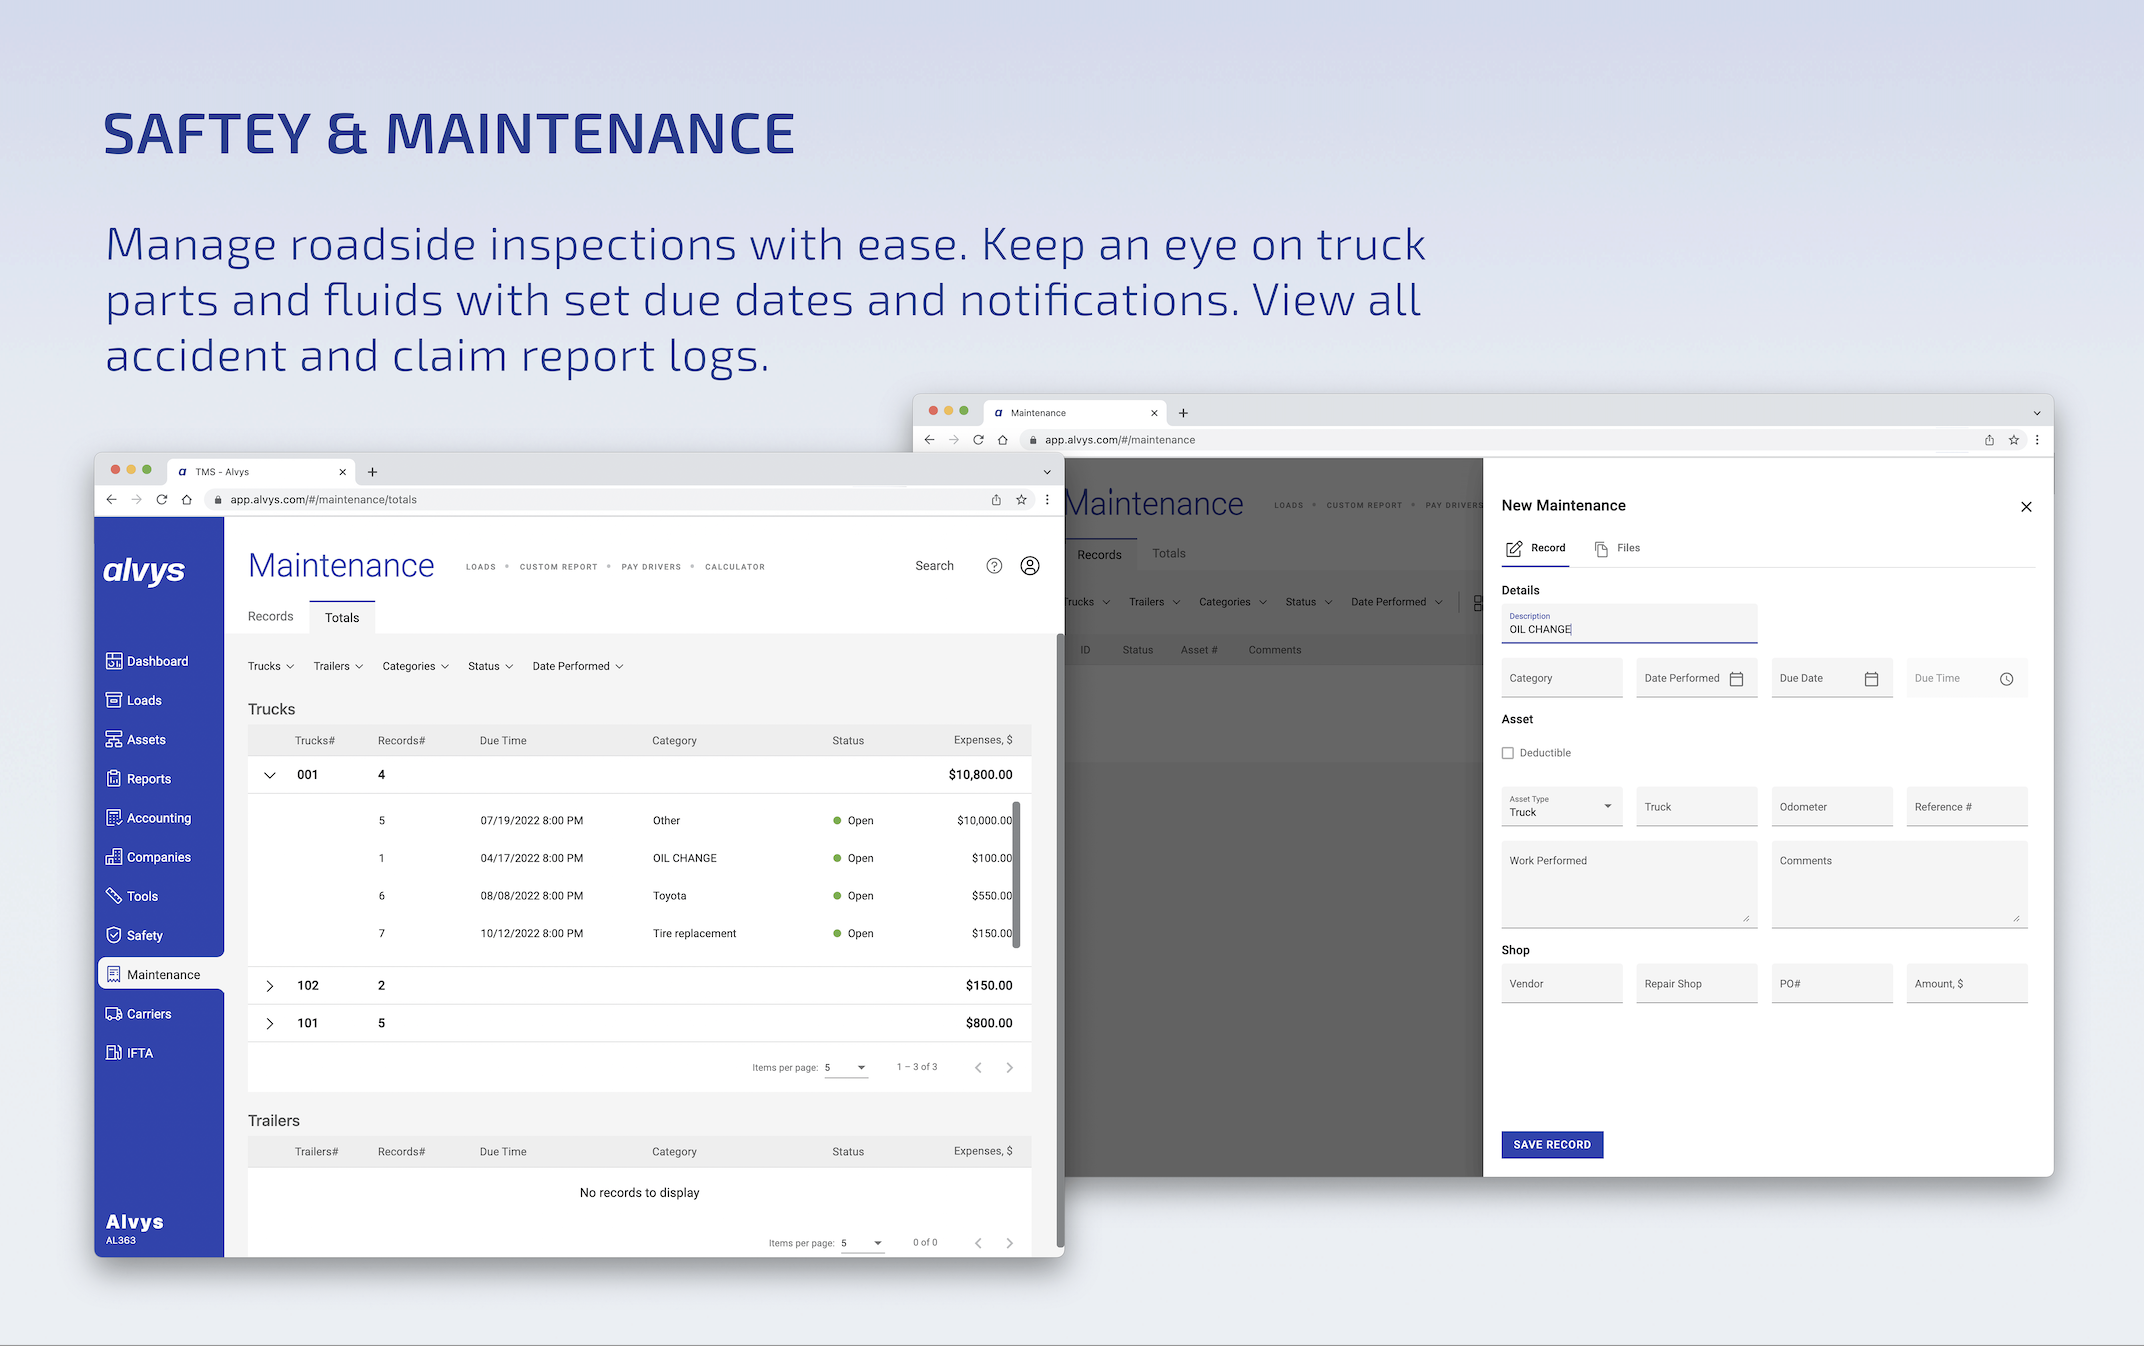 Safety and Maintenance Module. Manage roadside inspections with ease. Keep an eye on truck parts and fluids with set due dates and notifications. View all accident and claim report logs.